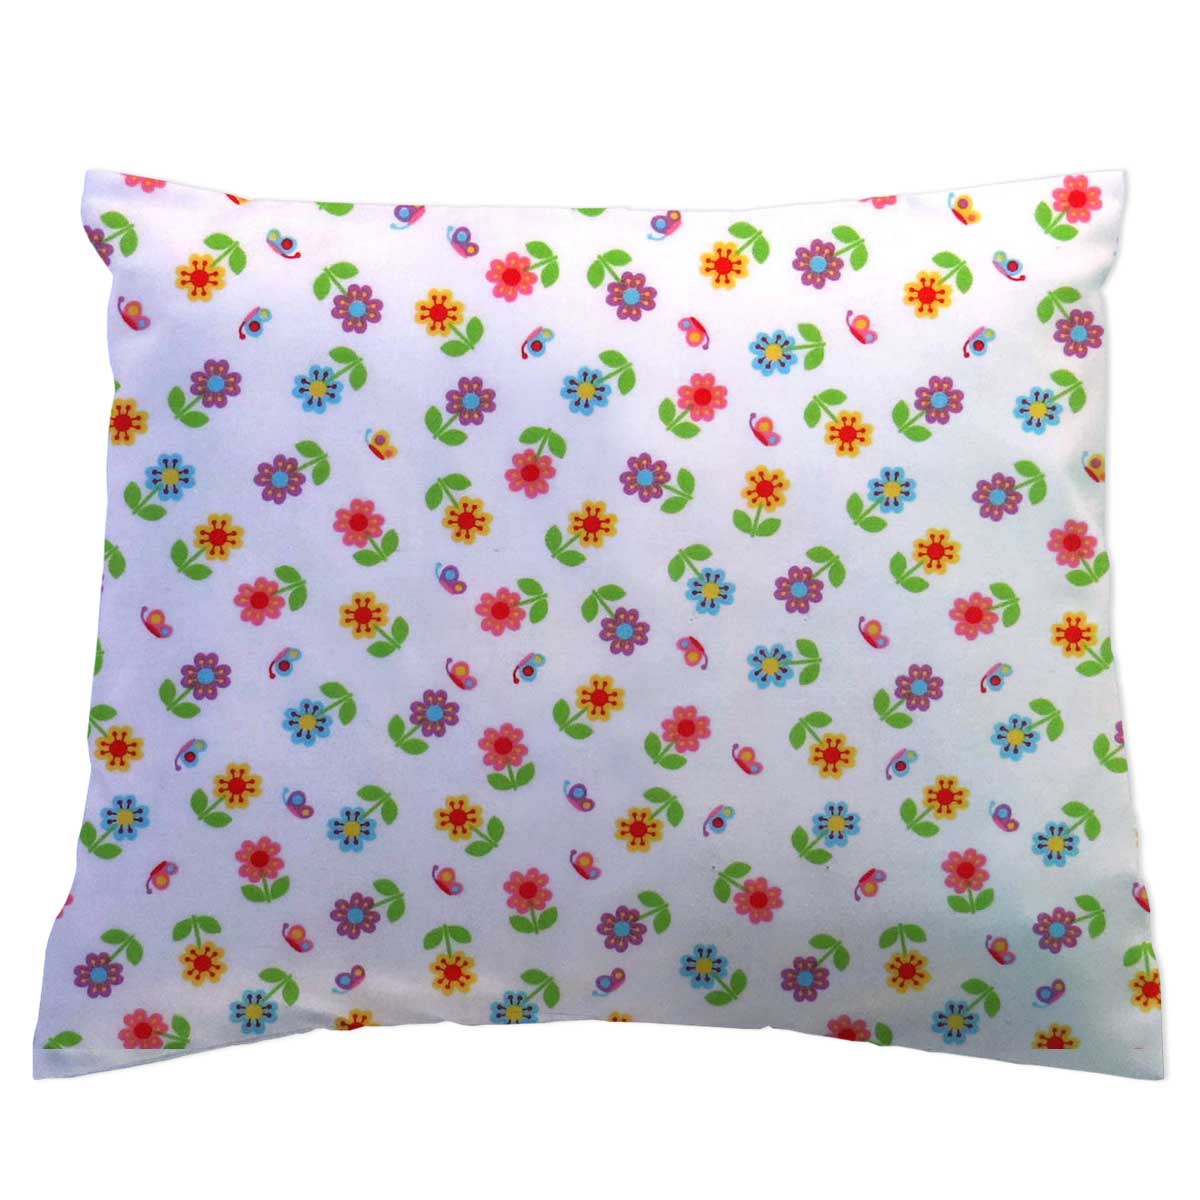 Baby Pillow Cases | Infant and Toddler Pillow Cases